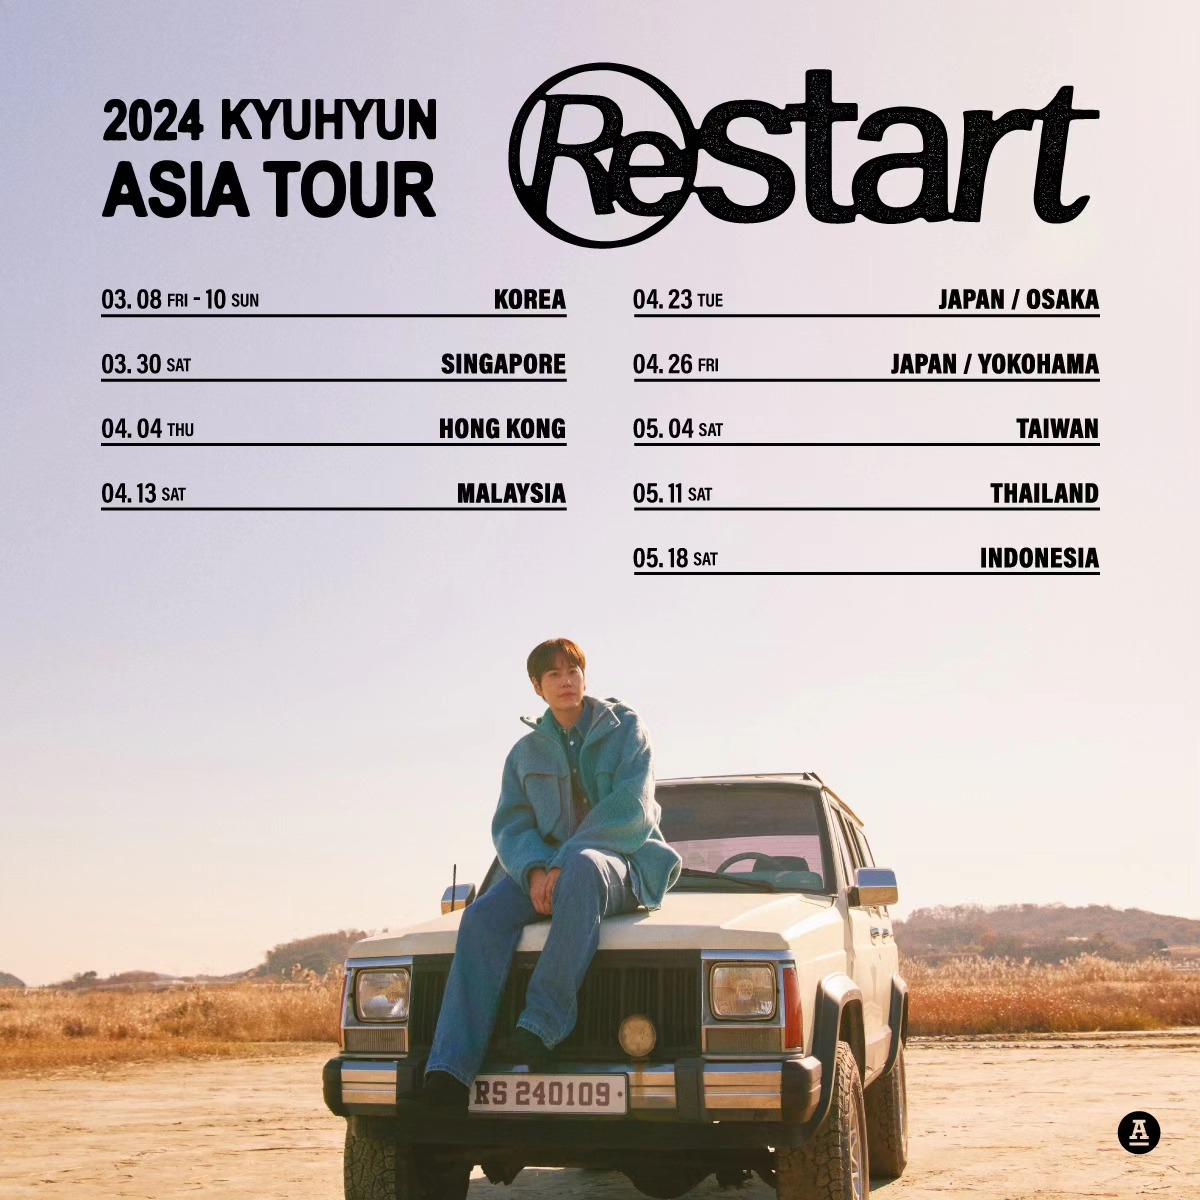 The schedule for Kyuhyun's first Asia tour (Antenna)